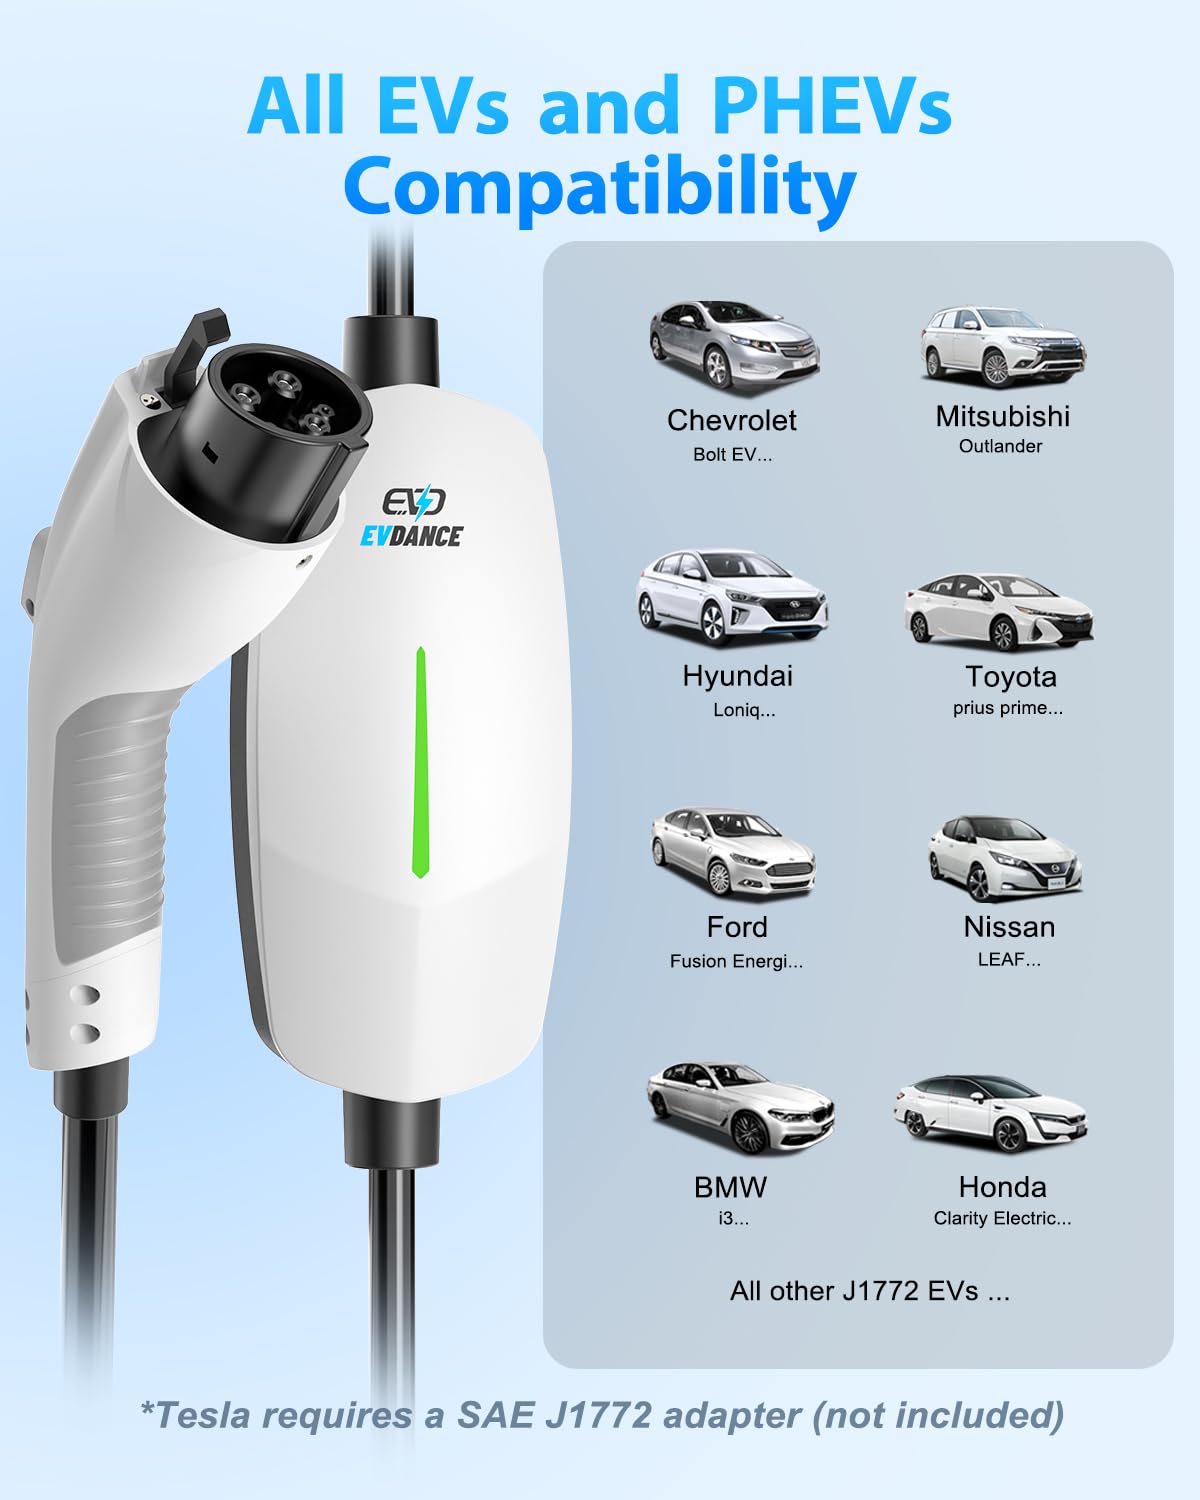 EVs and PHEVs compatibility, Tesla requires a SAE J1772 ADAPTER(NOT INCLUDED)